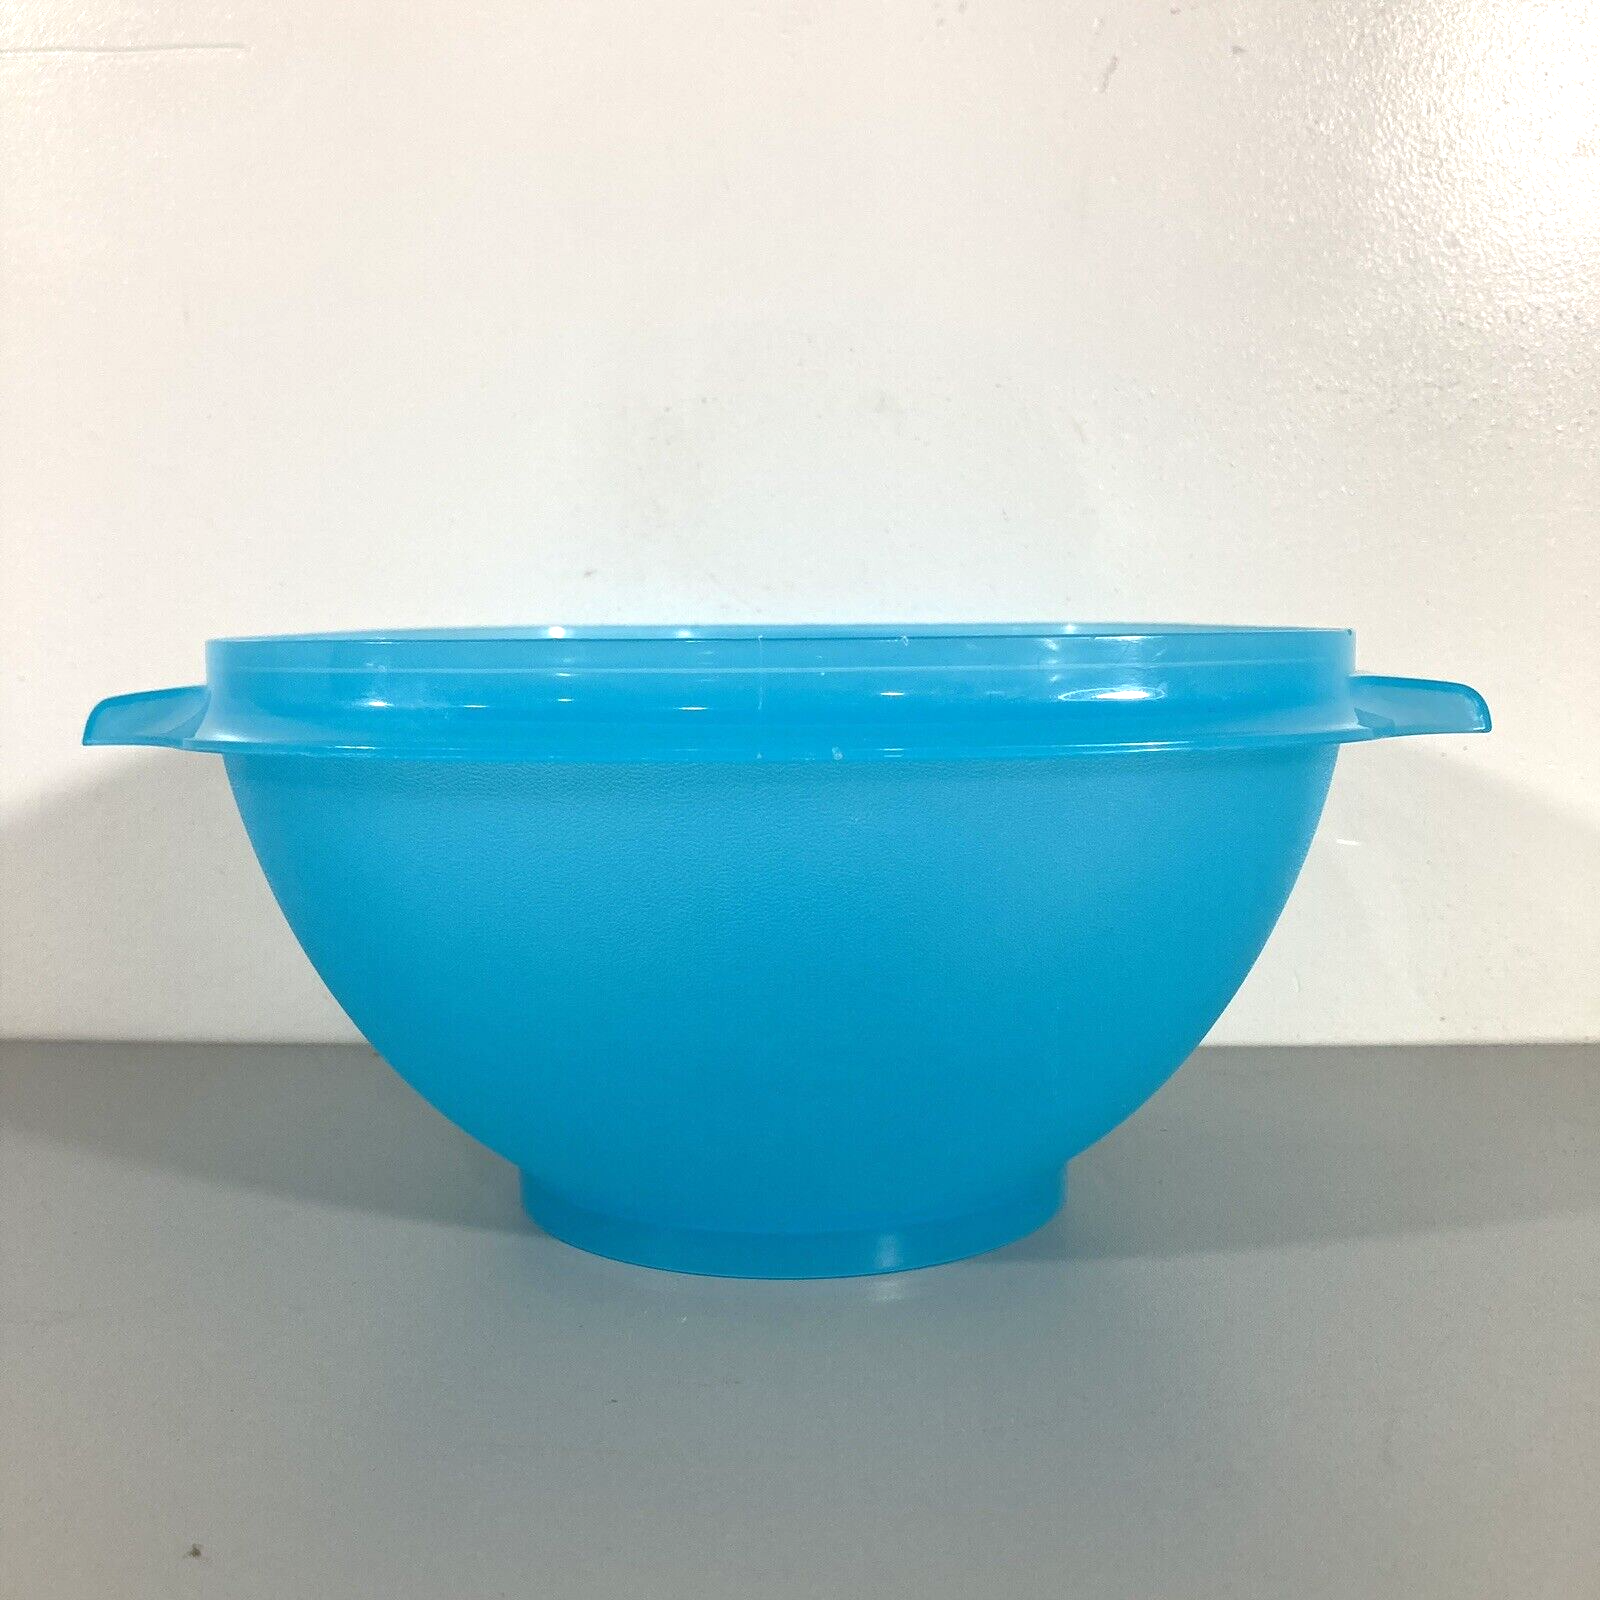 Tupperware 836-4 Bowl Storage Container No Lid Blue - $5.39